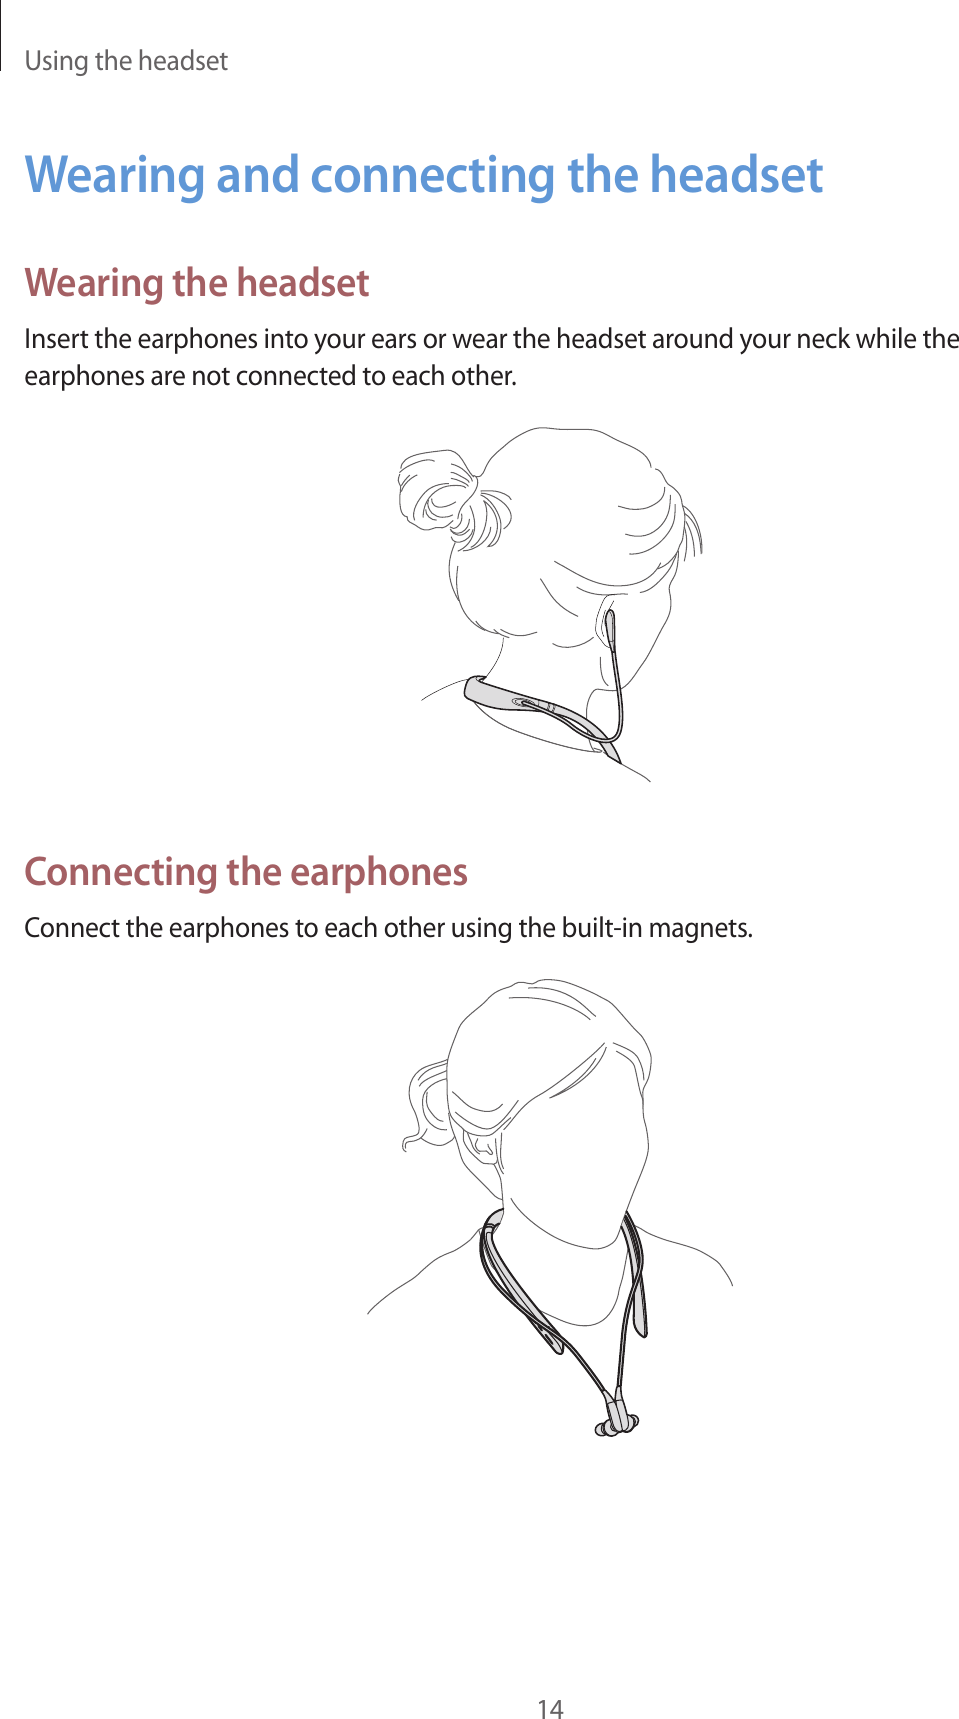 Using the headset14Wearing and connecting the headsetWearing the headsetInsert the earphones into your ears or wear the headset around your neck while the earphones are not connected to each other.Connecting the earphonesConnect the earphones to each other using the built-in magnets.